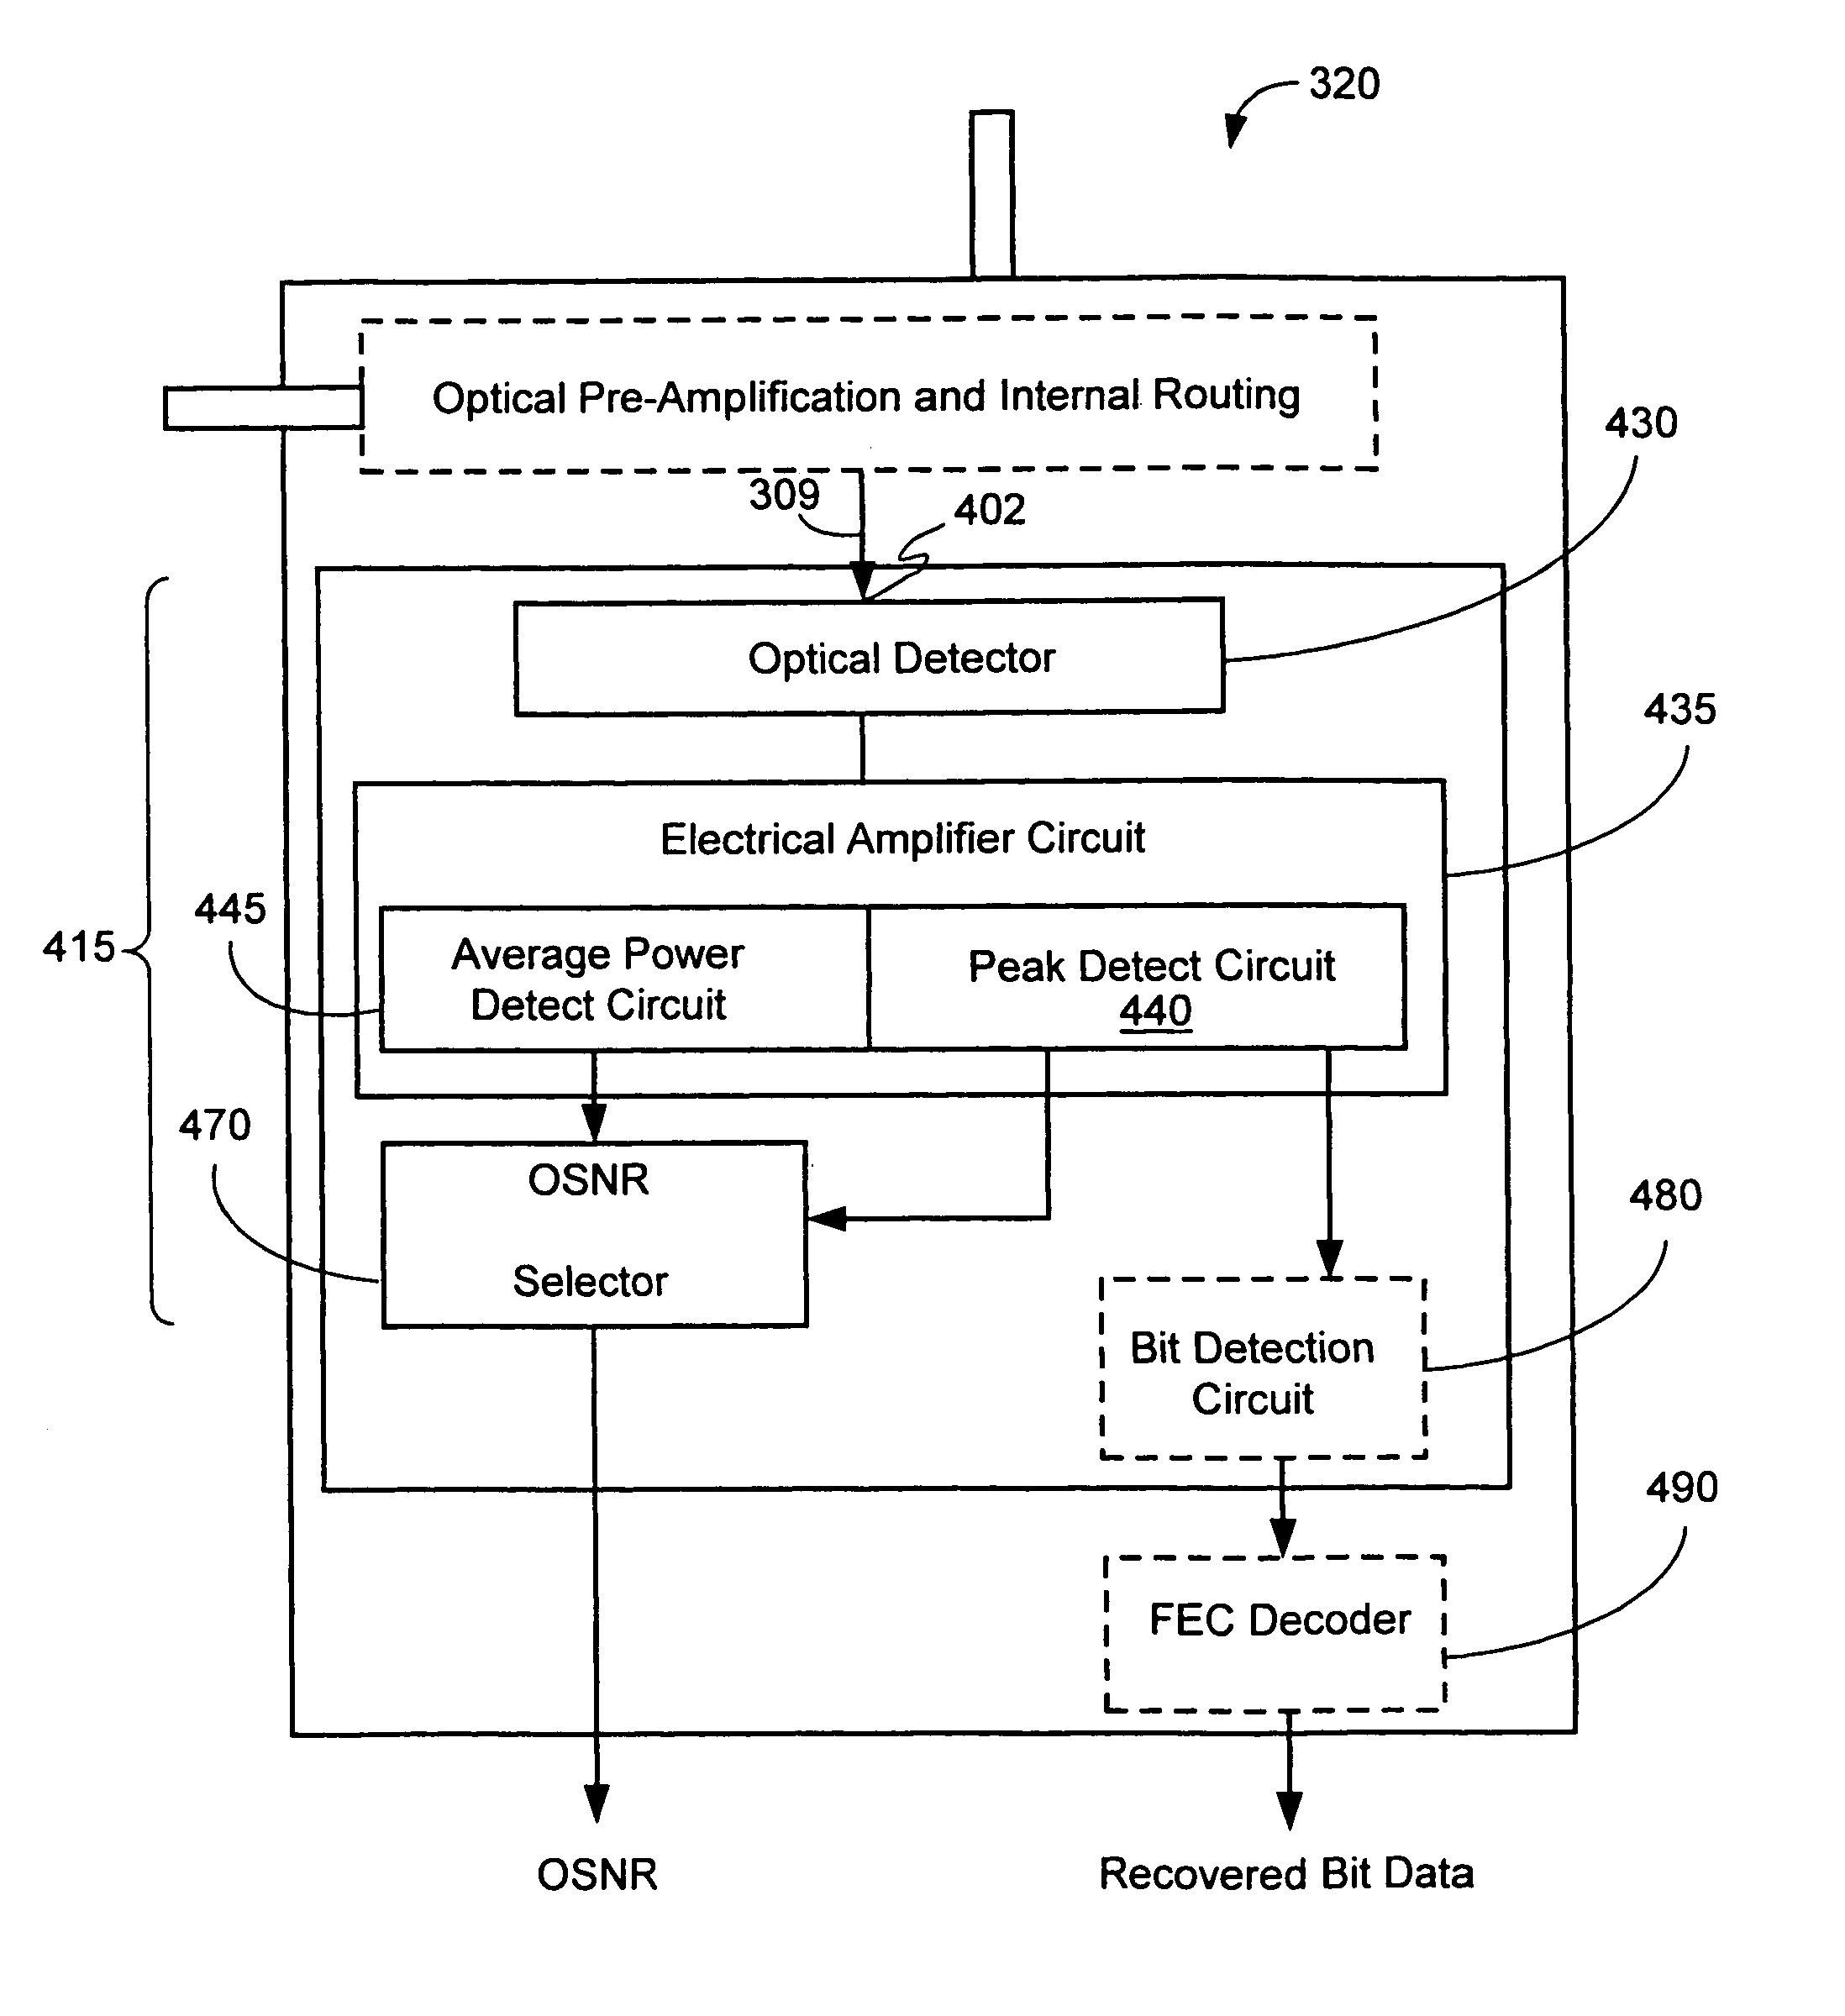 System and method for monitoring OSNR in an optical network